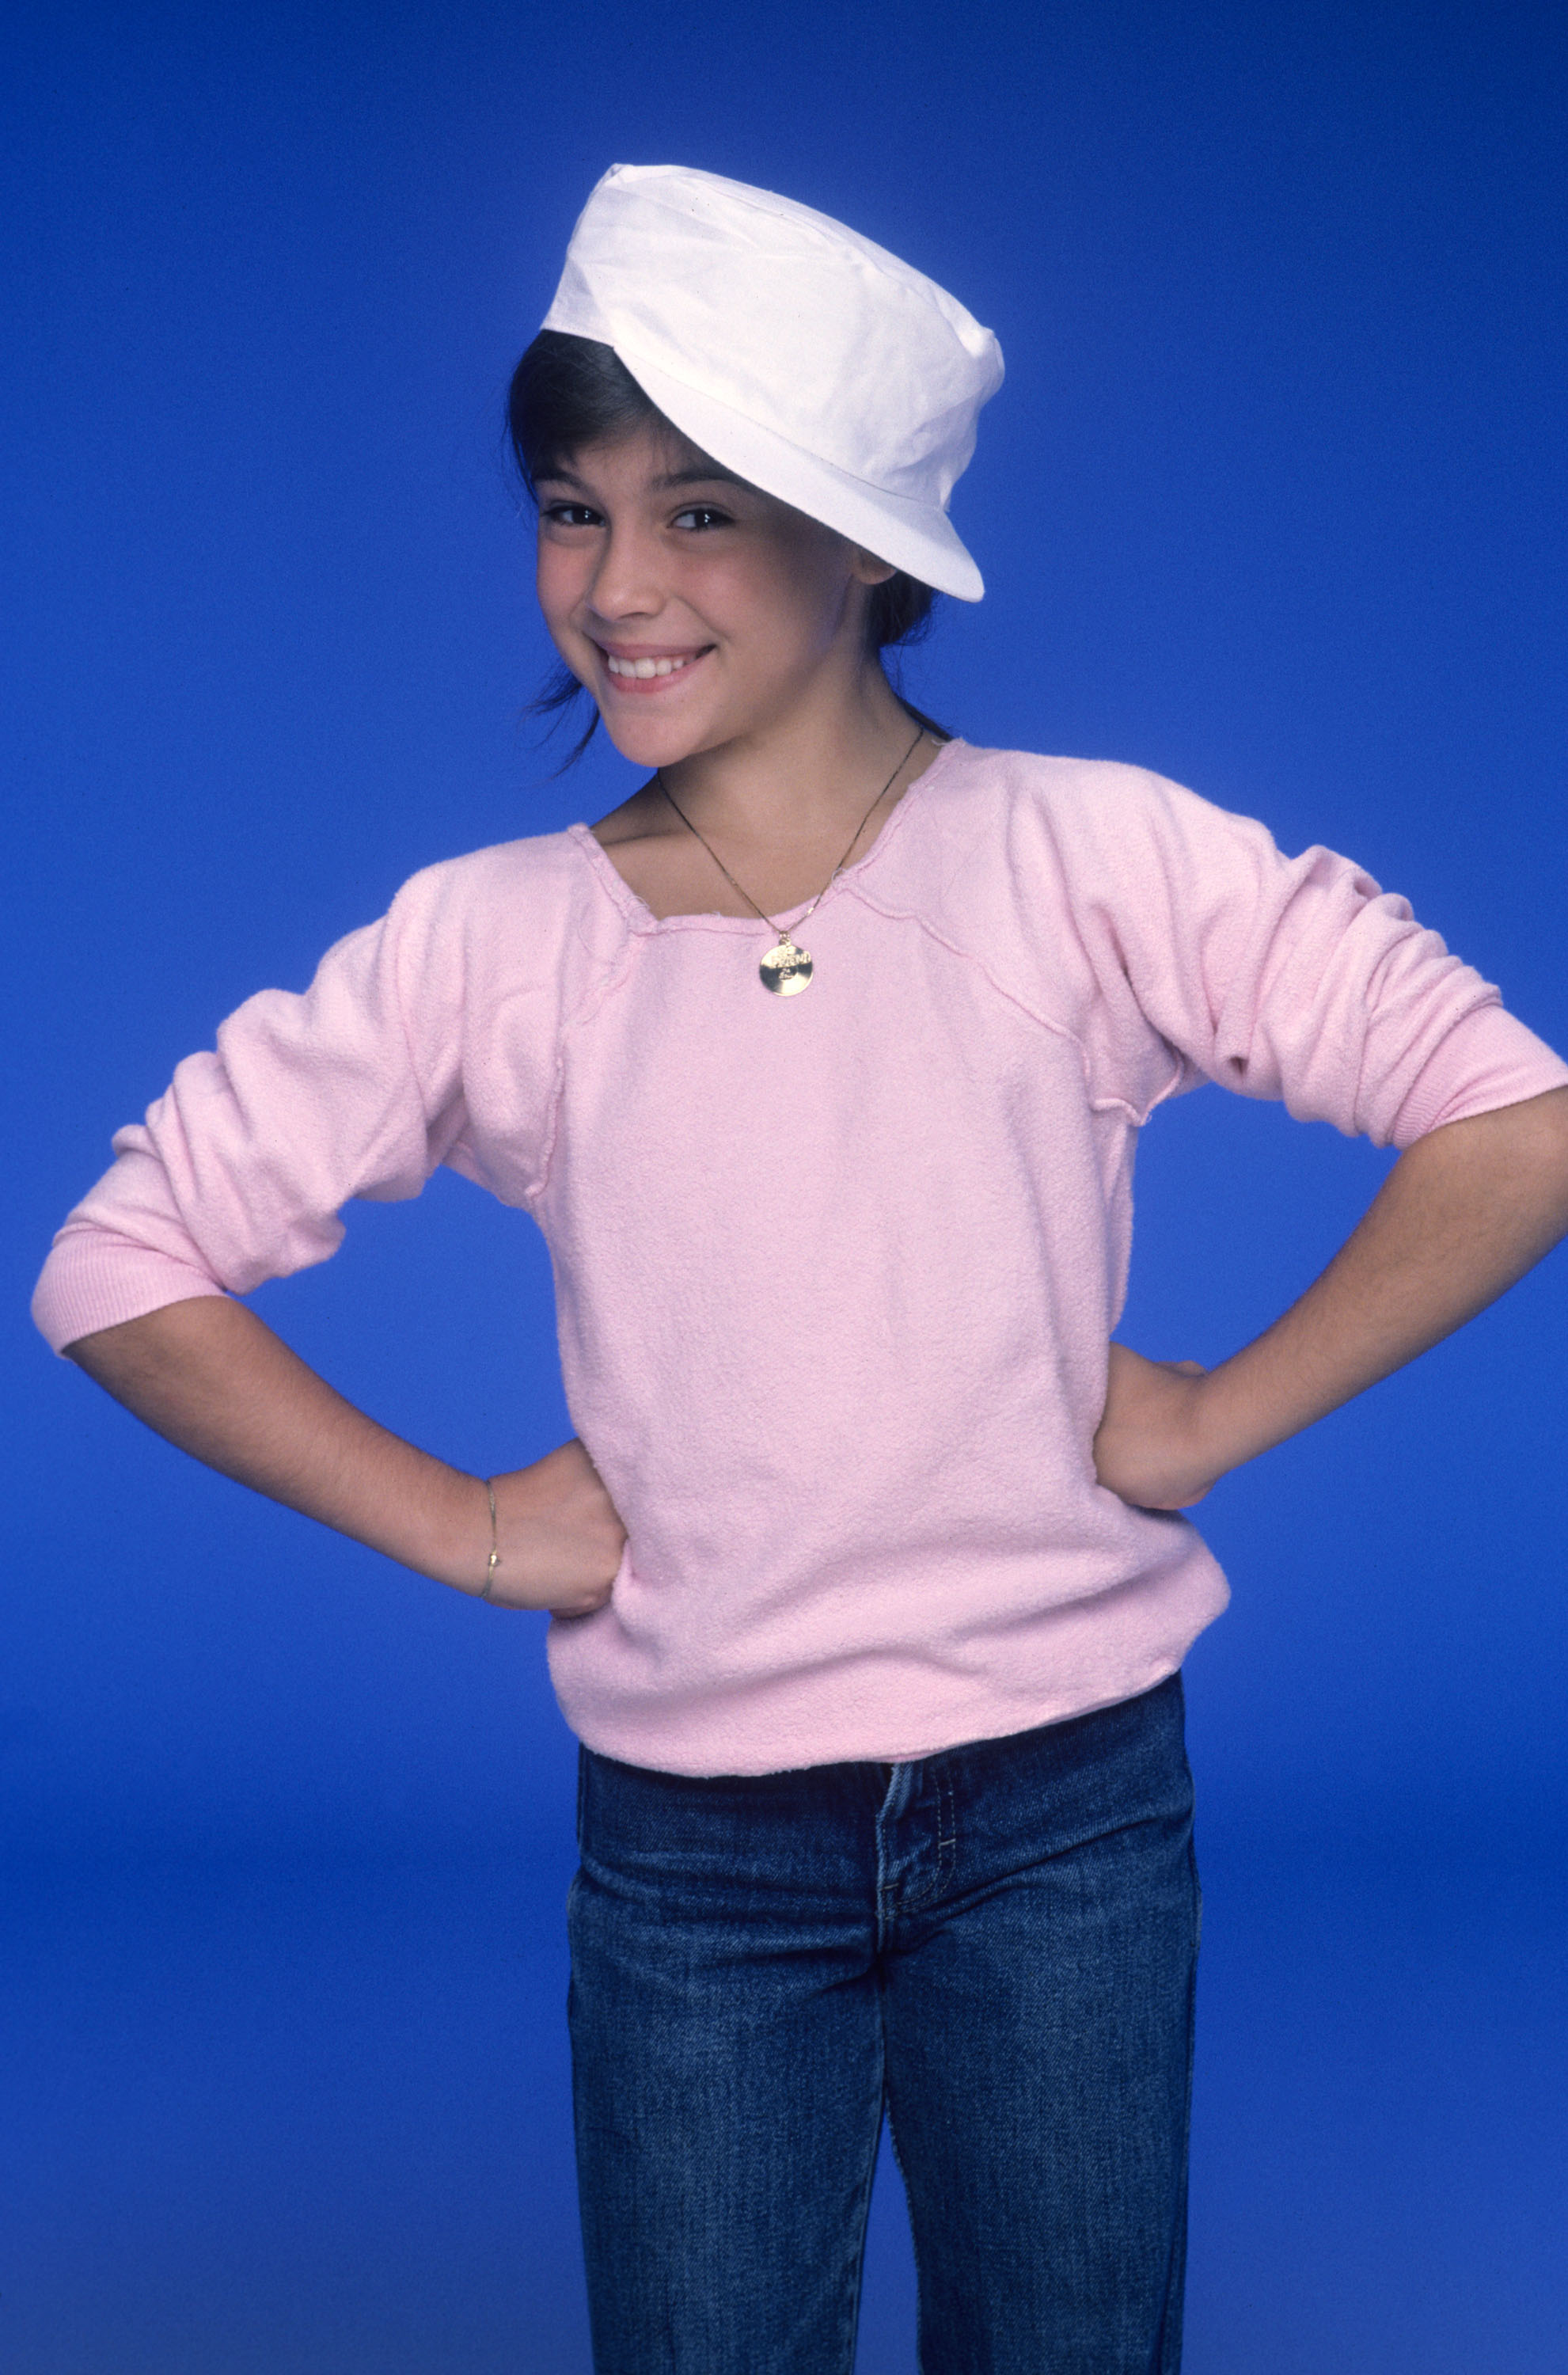 Alyssa Milano on "Who's The Boss," on September 20, 1984. | Source: Getty Images